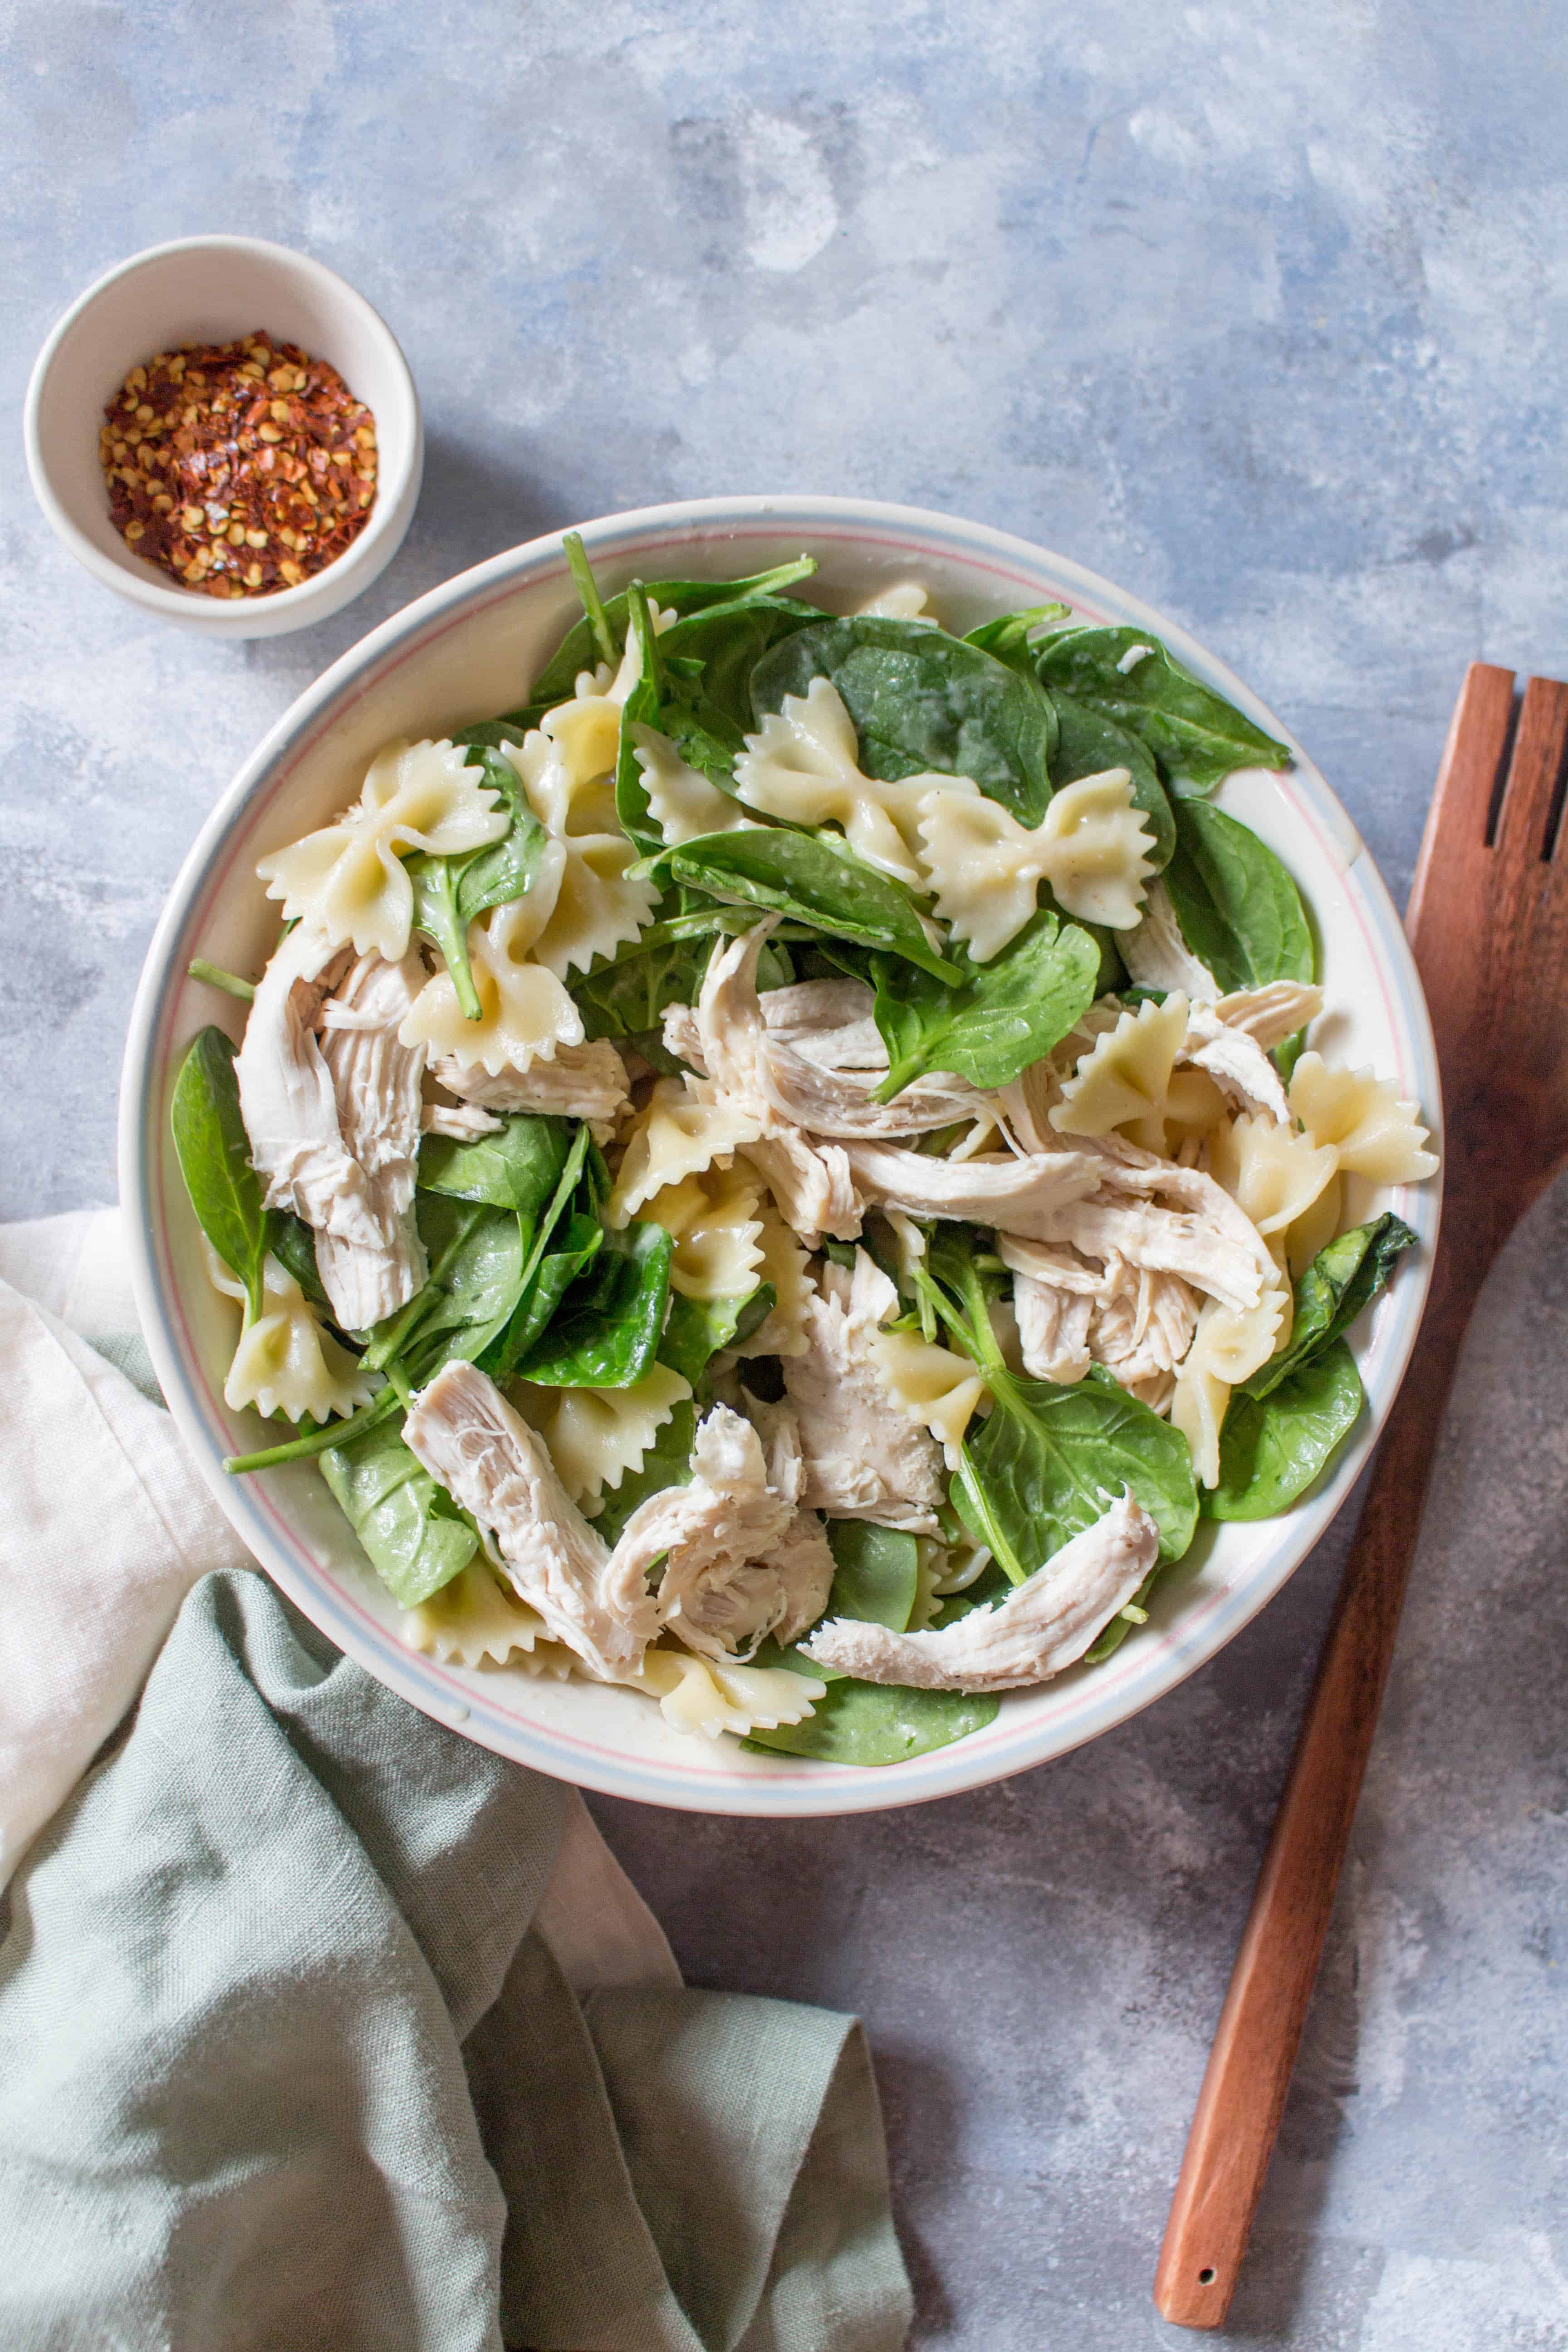 This Cold Chicken Spinach Pasta Salad is the perfect easy cold meal prep idea or a dish for a potluck!